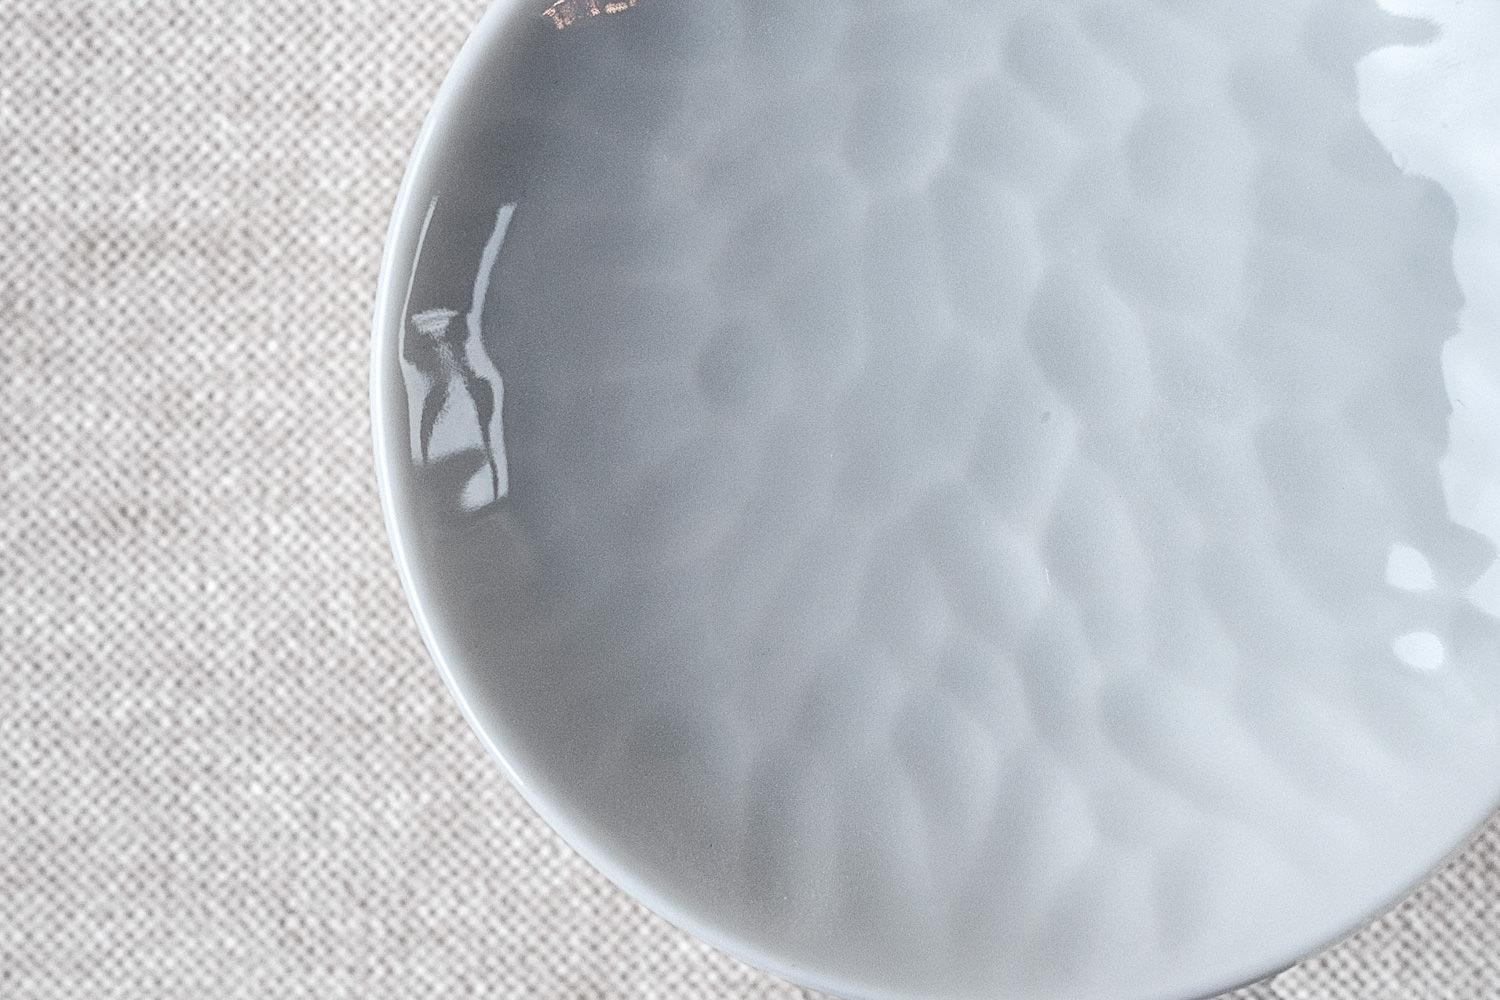 • Small porcelain side dish
• 7,5 cm ø x 3,5 cm
• Perfect for a sexy amuse-bouche, a pre-dessert or side dish
• Also works for the essential coarse sea salt on the table
• White glazed
• Designed in Amsterdam / handmade in France
• True